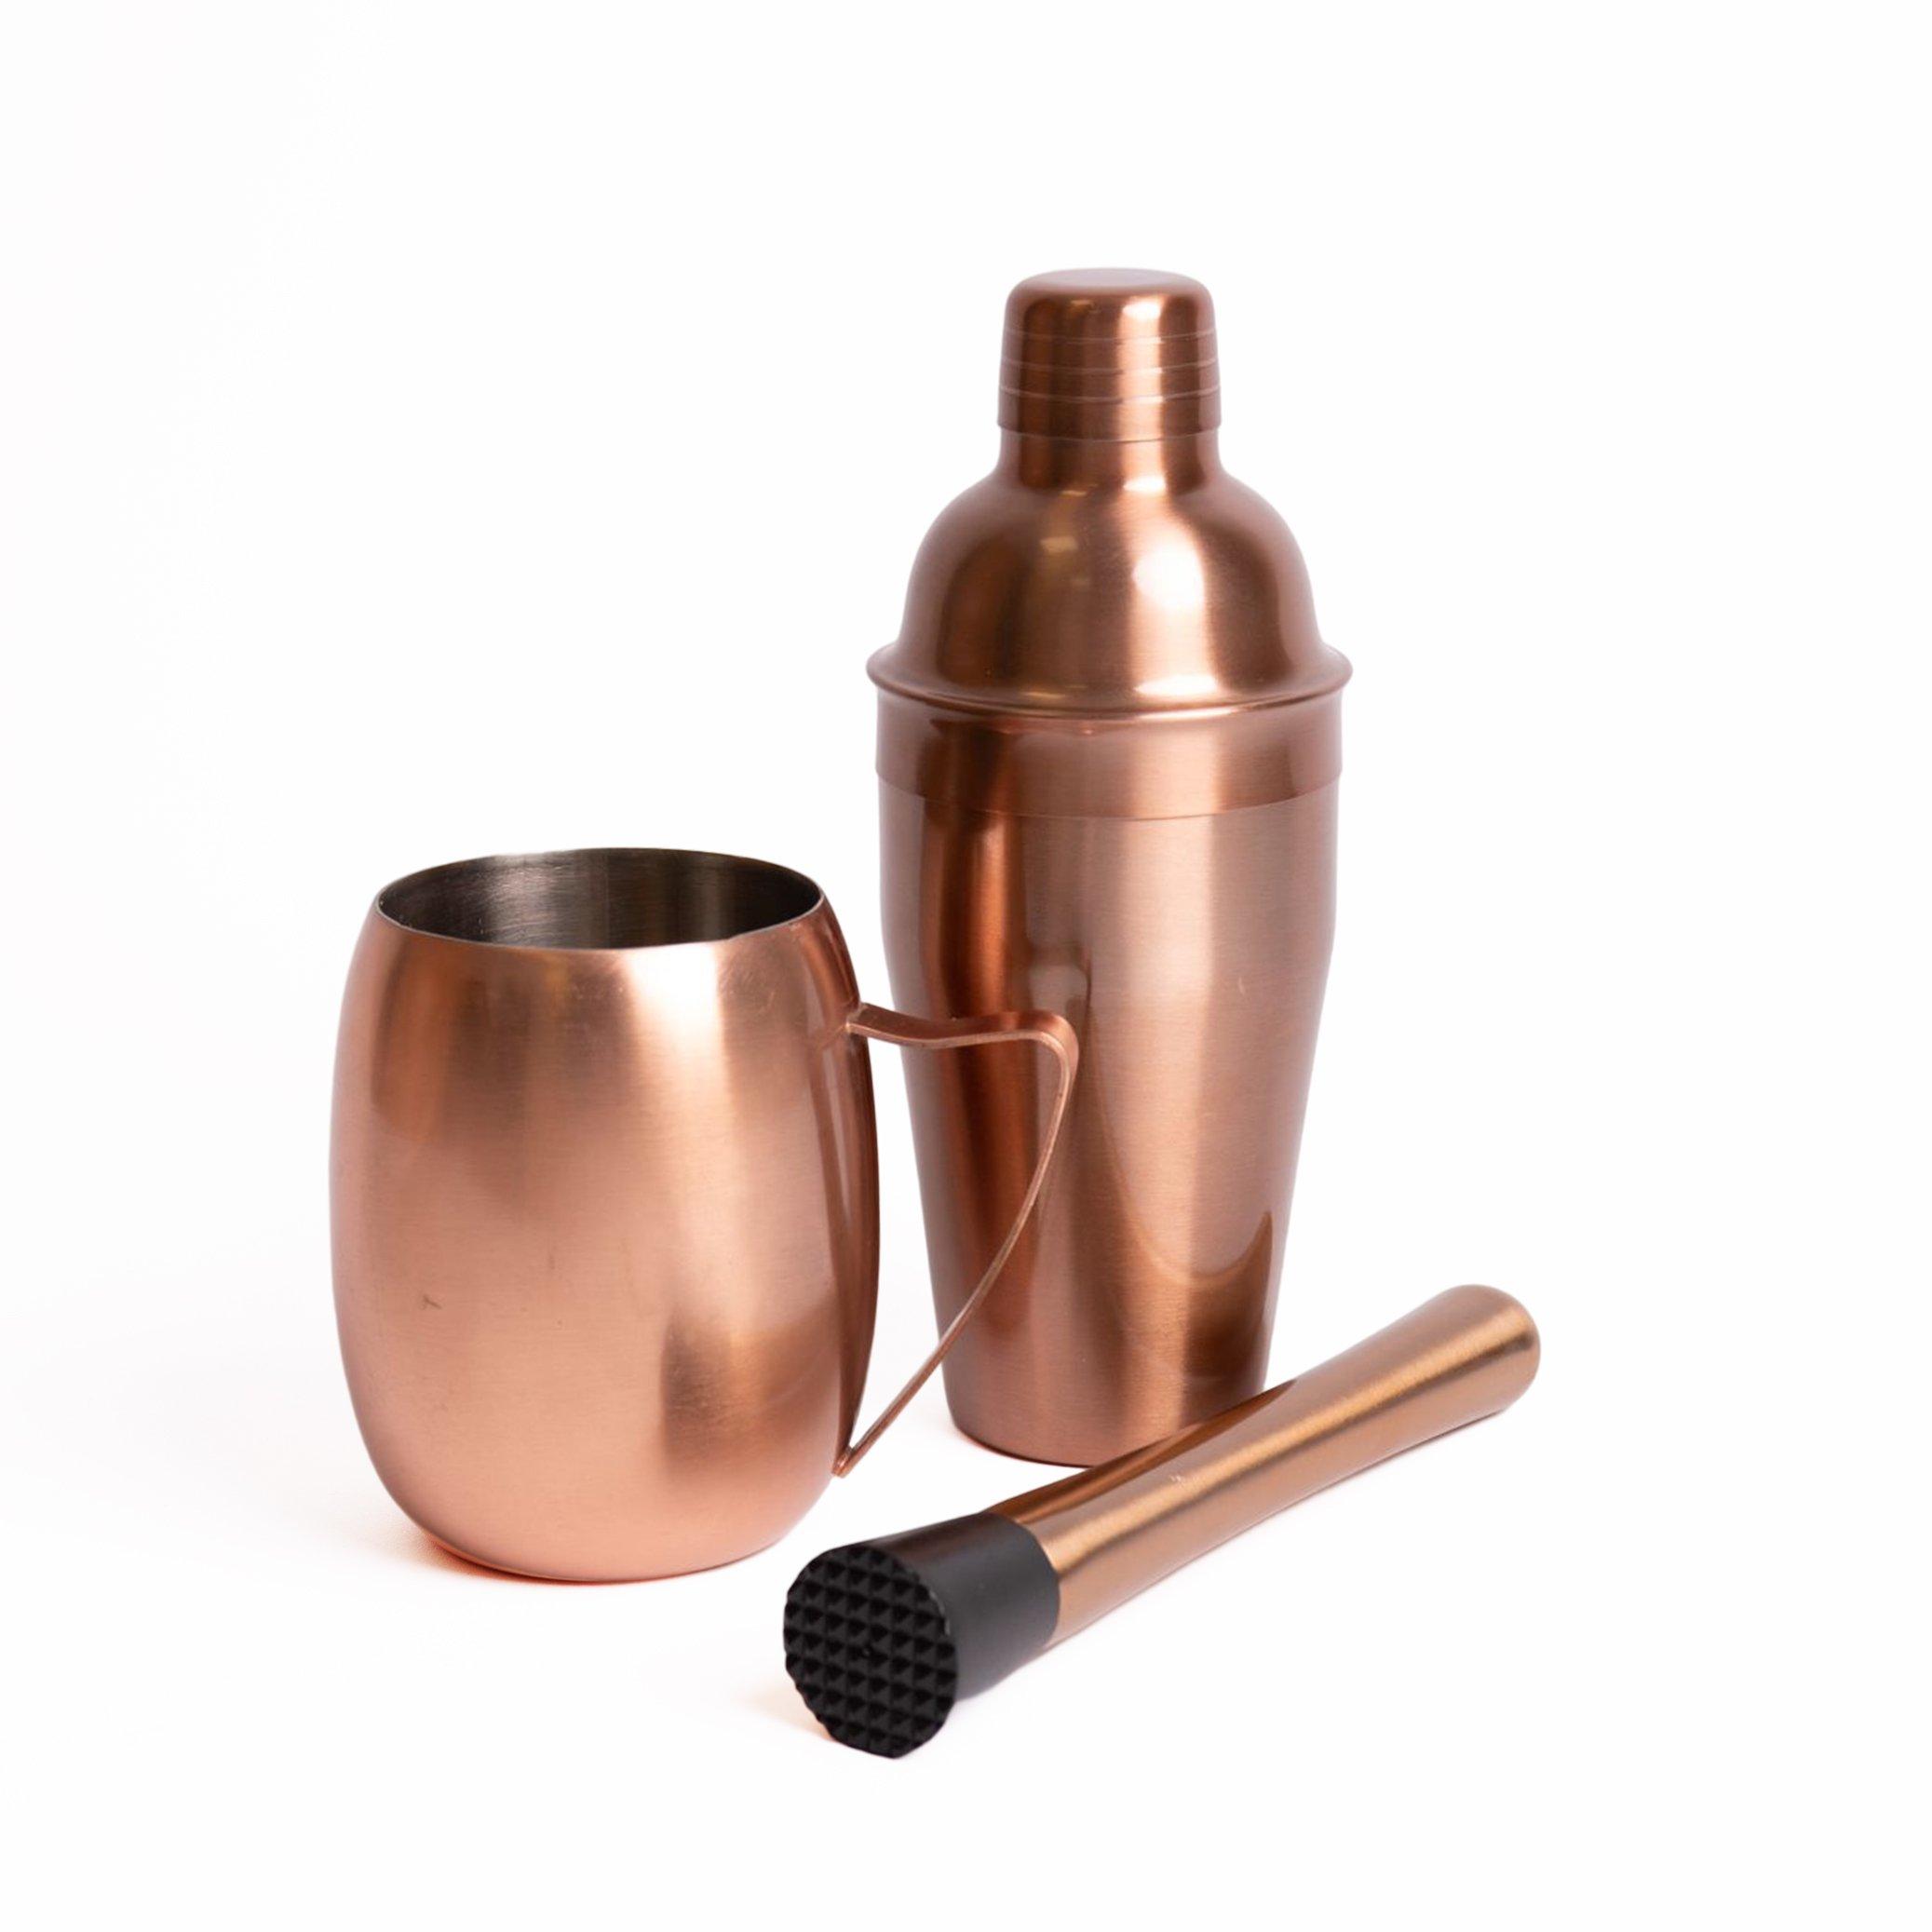 Cocktail-Making Set with Copper-Finish Cocktail Shaker, Muddler and Moscow Mule Mug